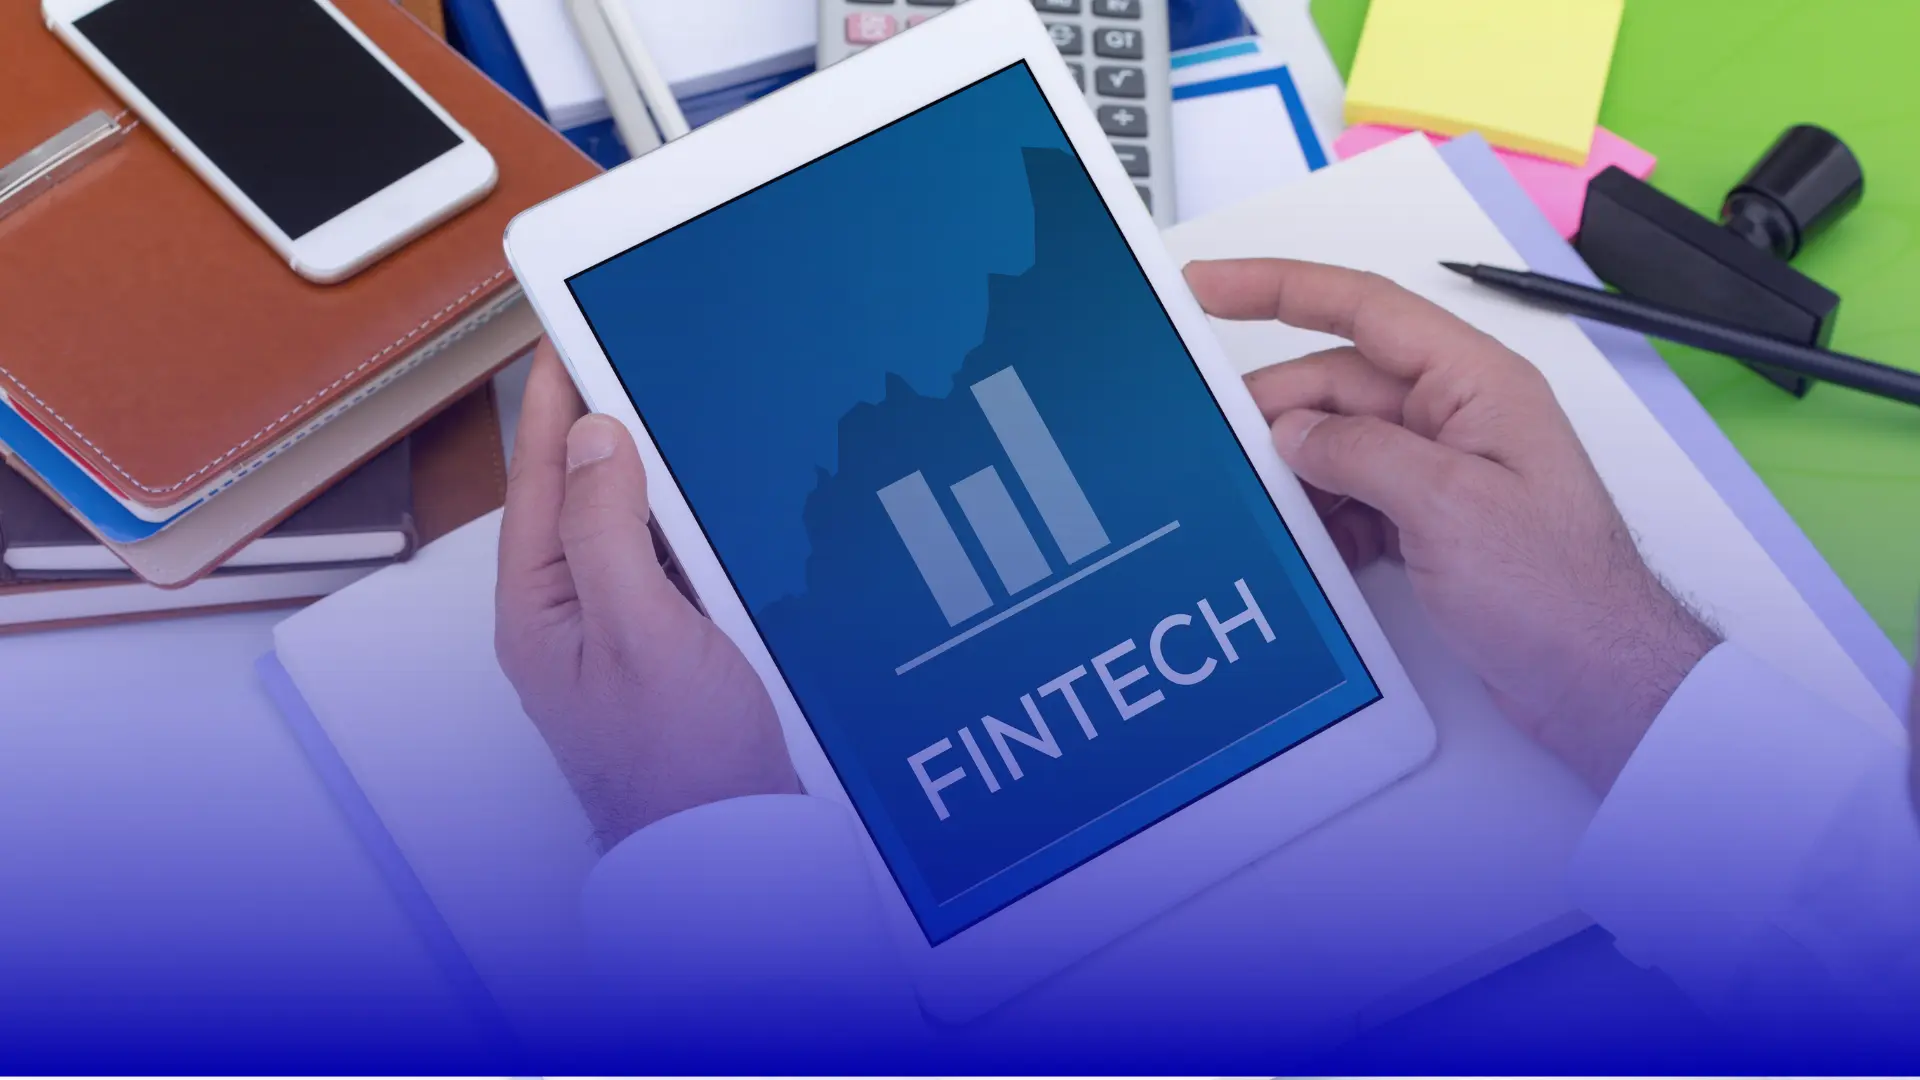 Fintechs in Brazil: discover the categories